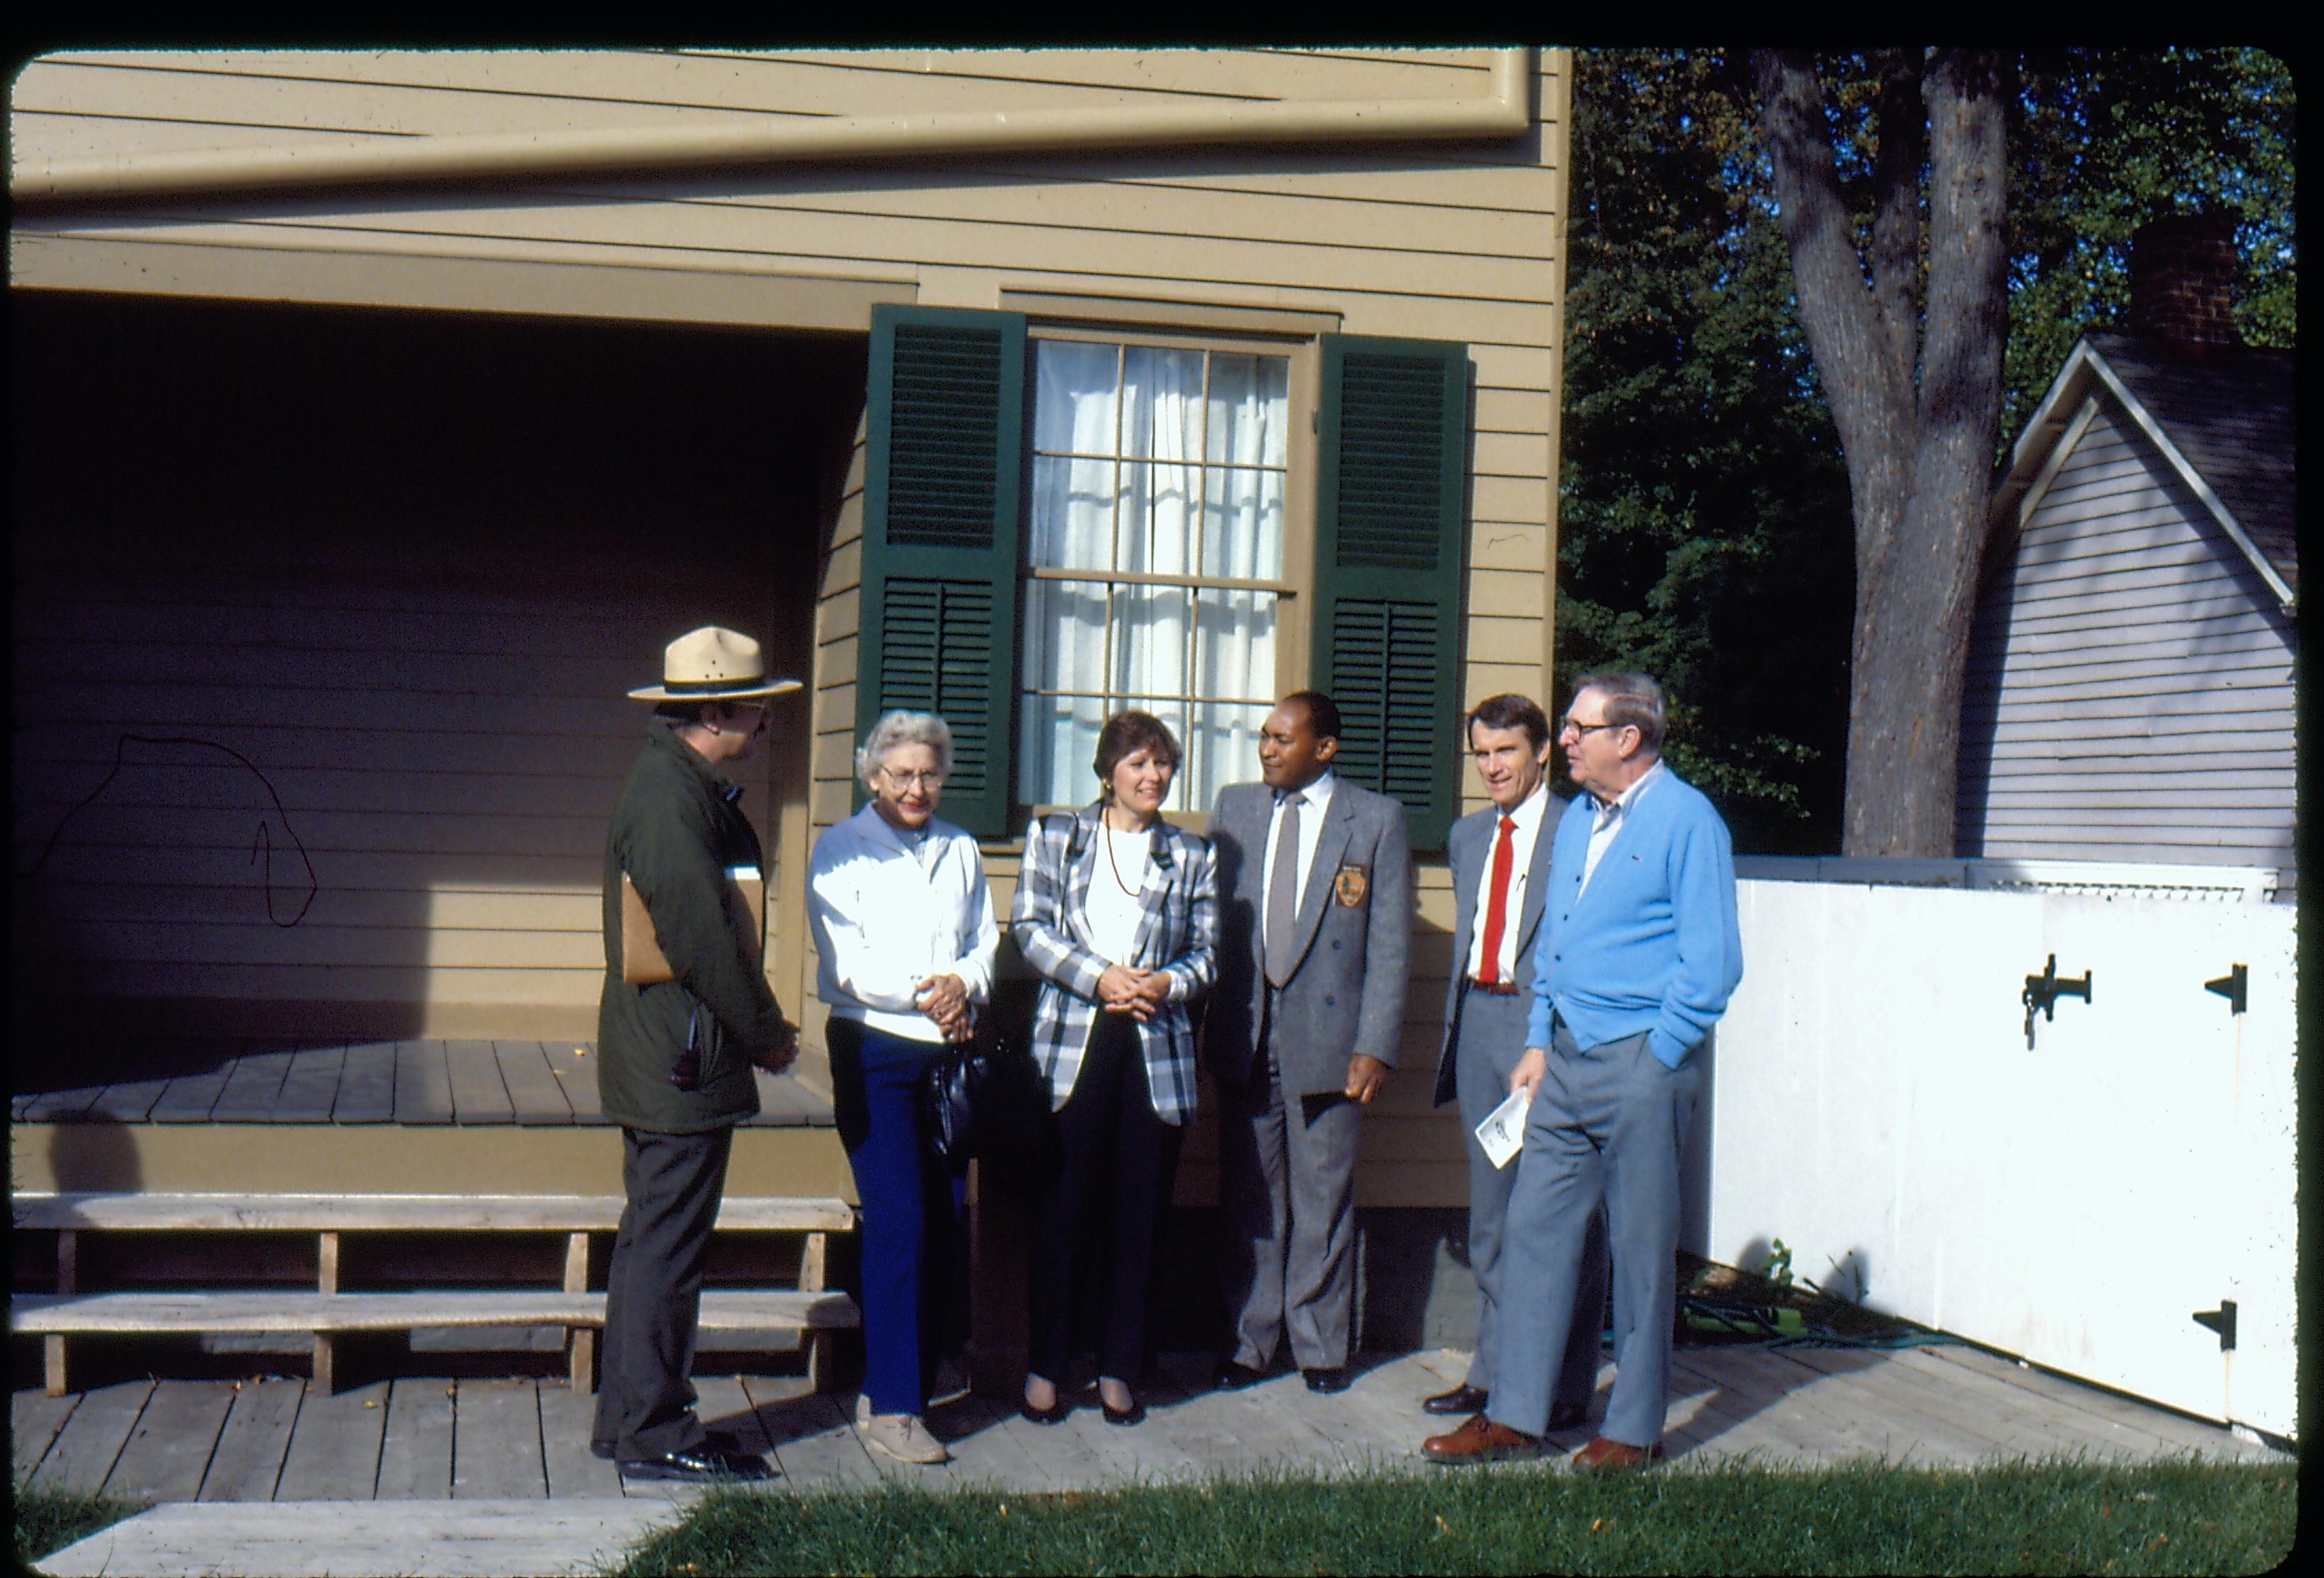 Superintendent Gentry Davis and a second NPS ranger near the Lincoln Home pantry giving a tour to a VIP group after the Restoration of the Lincoln Home. The Corneau House appears in the background. Photographer facing north west.